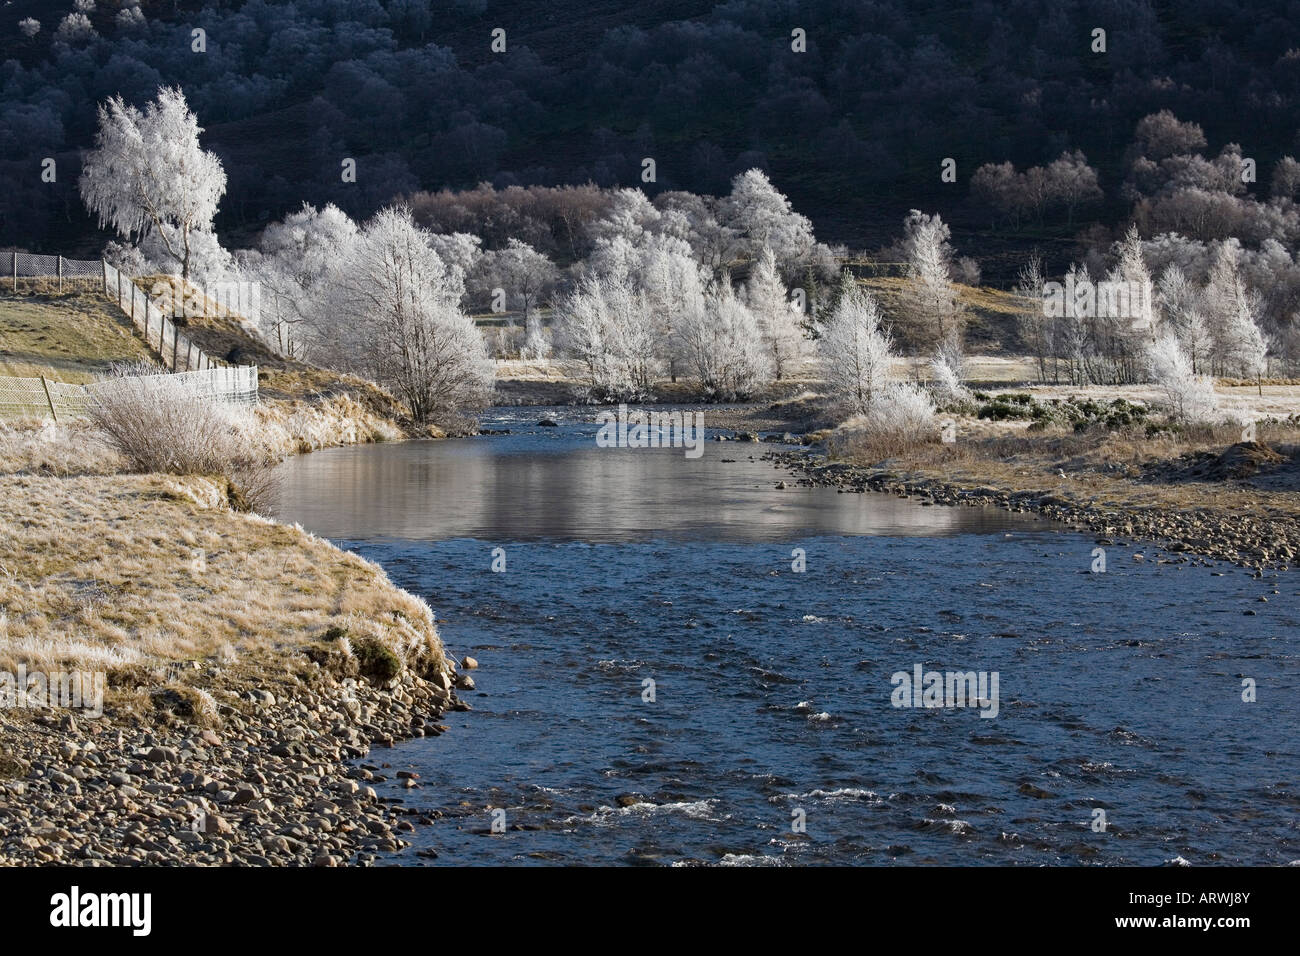 Hoar frost on riverside frozen trees; The River Clunie and frosted birch trees. Cold january winter landscapes at Braemar, Aberdeenshire, Scotland, UK Stock Photo